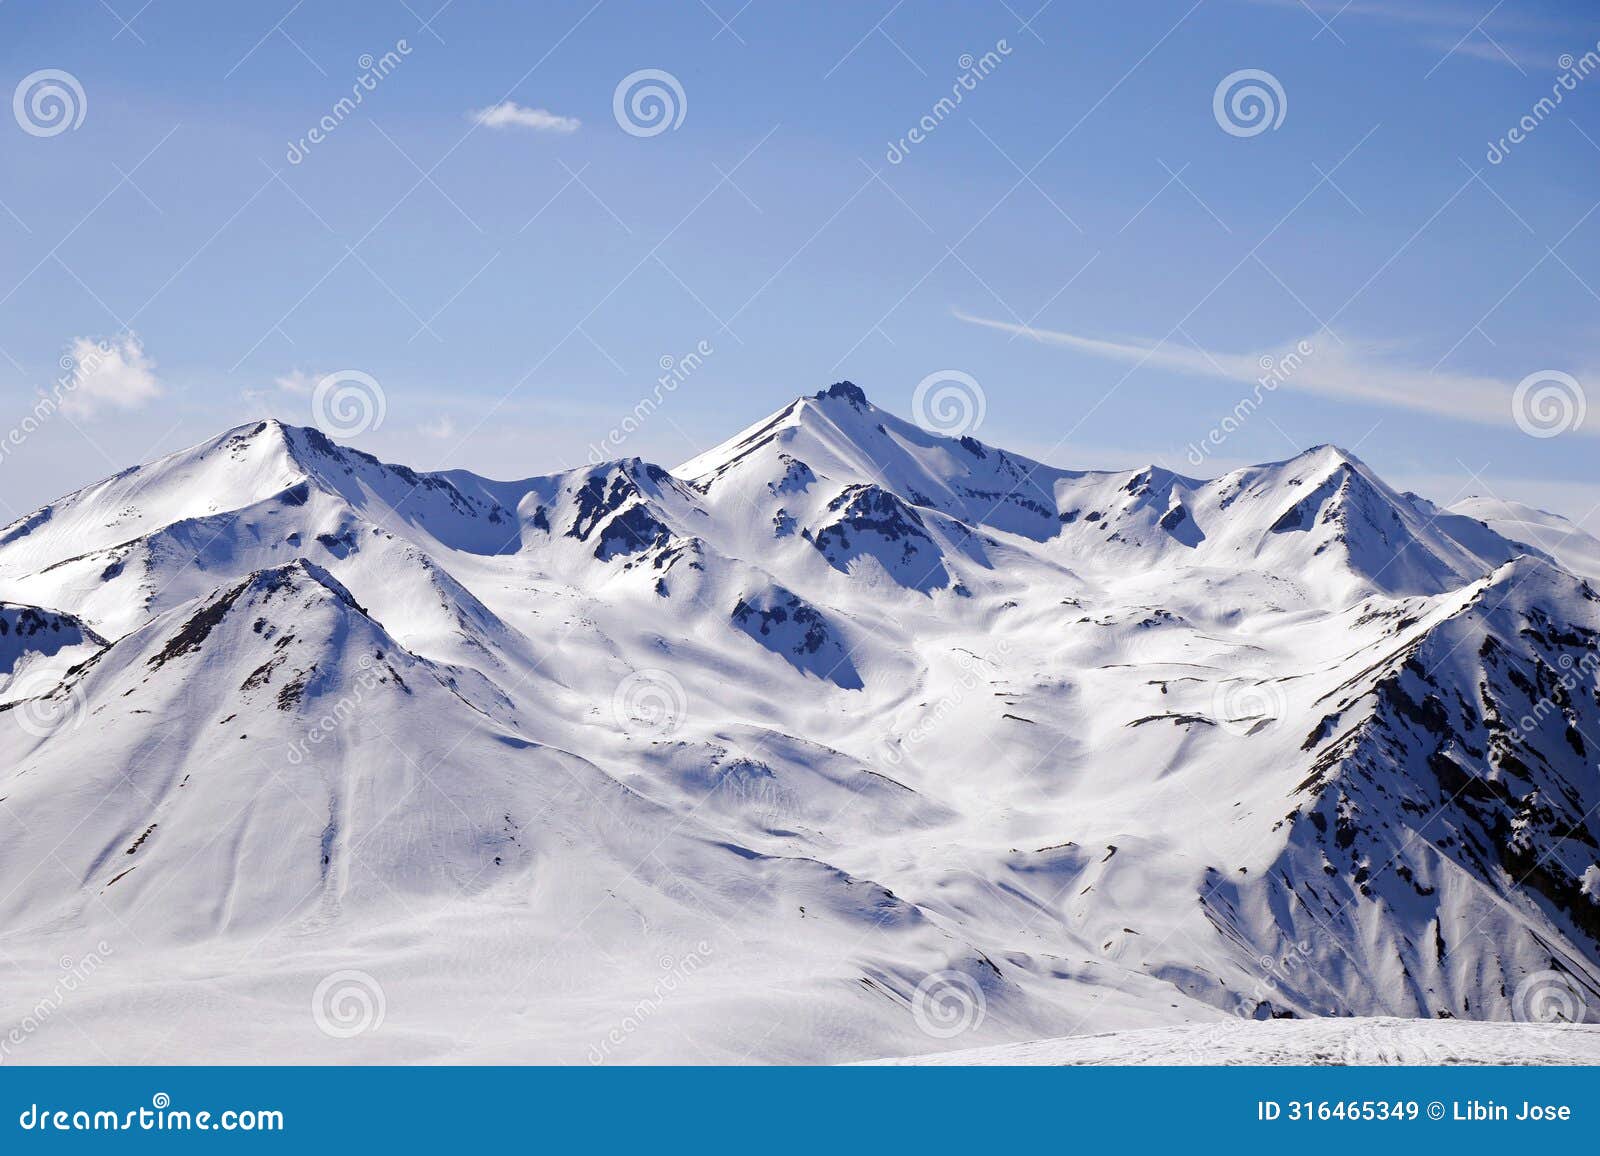 the caucasus mountain, or caucasia, transcontinental region between the black sea and the caspian sea, mainly comprising armenia,